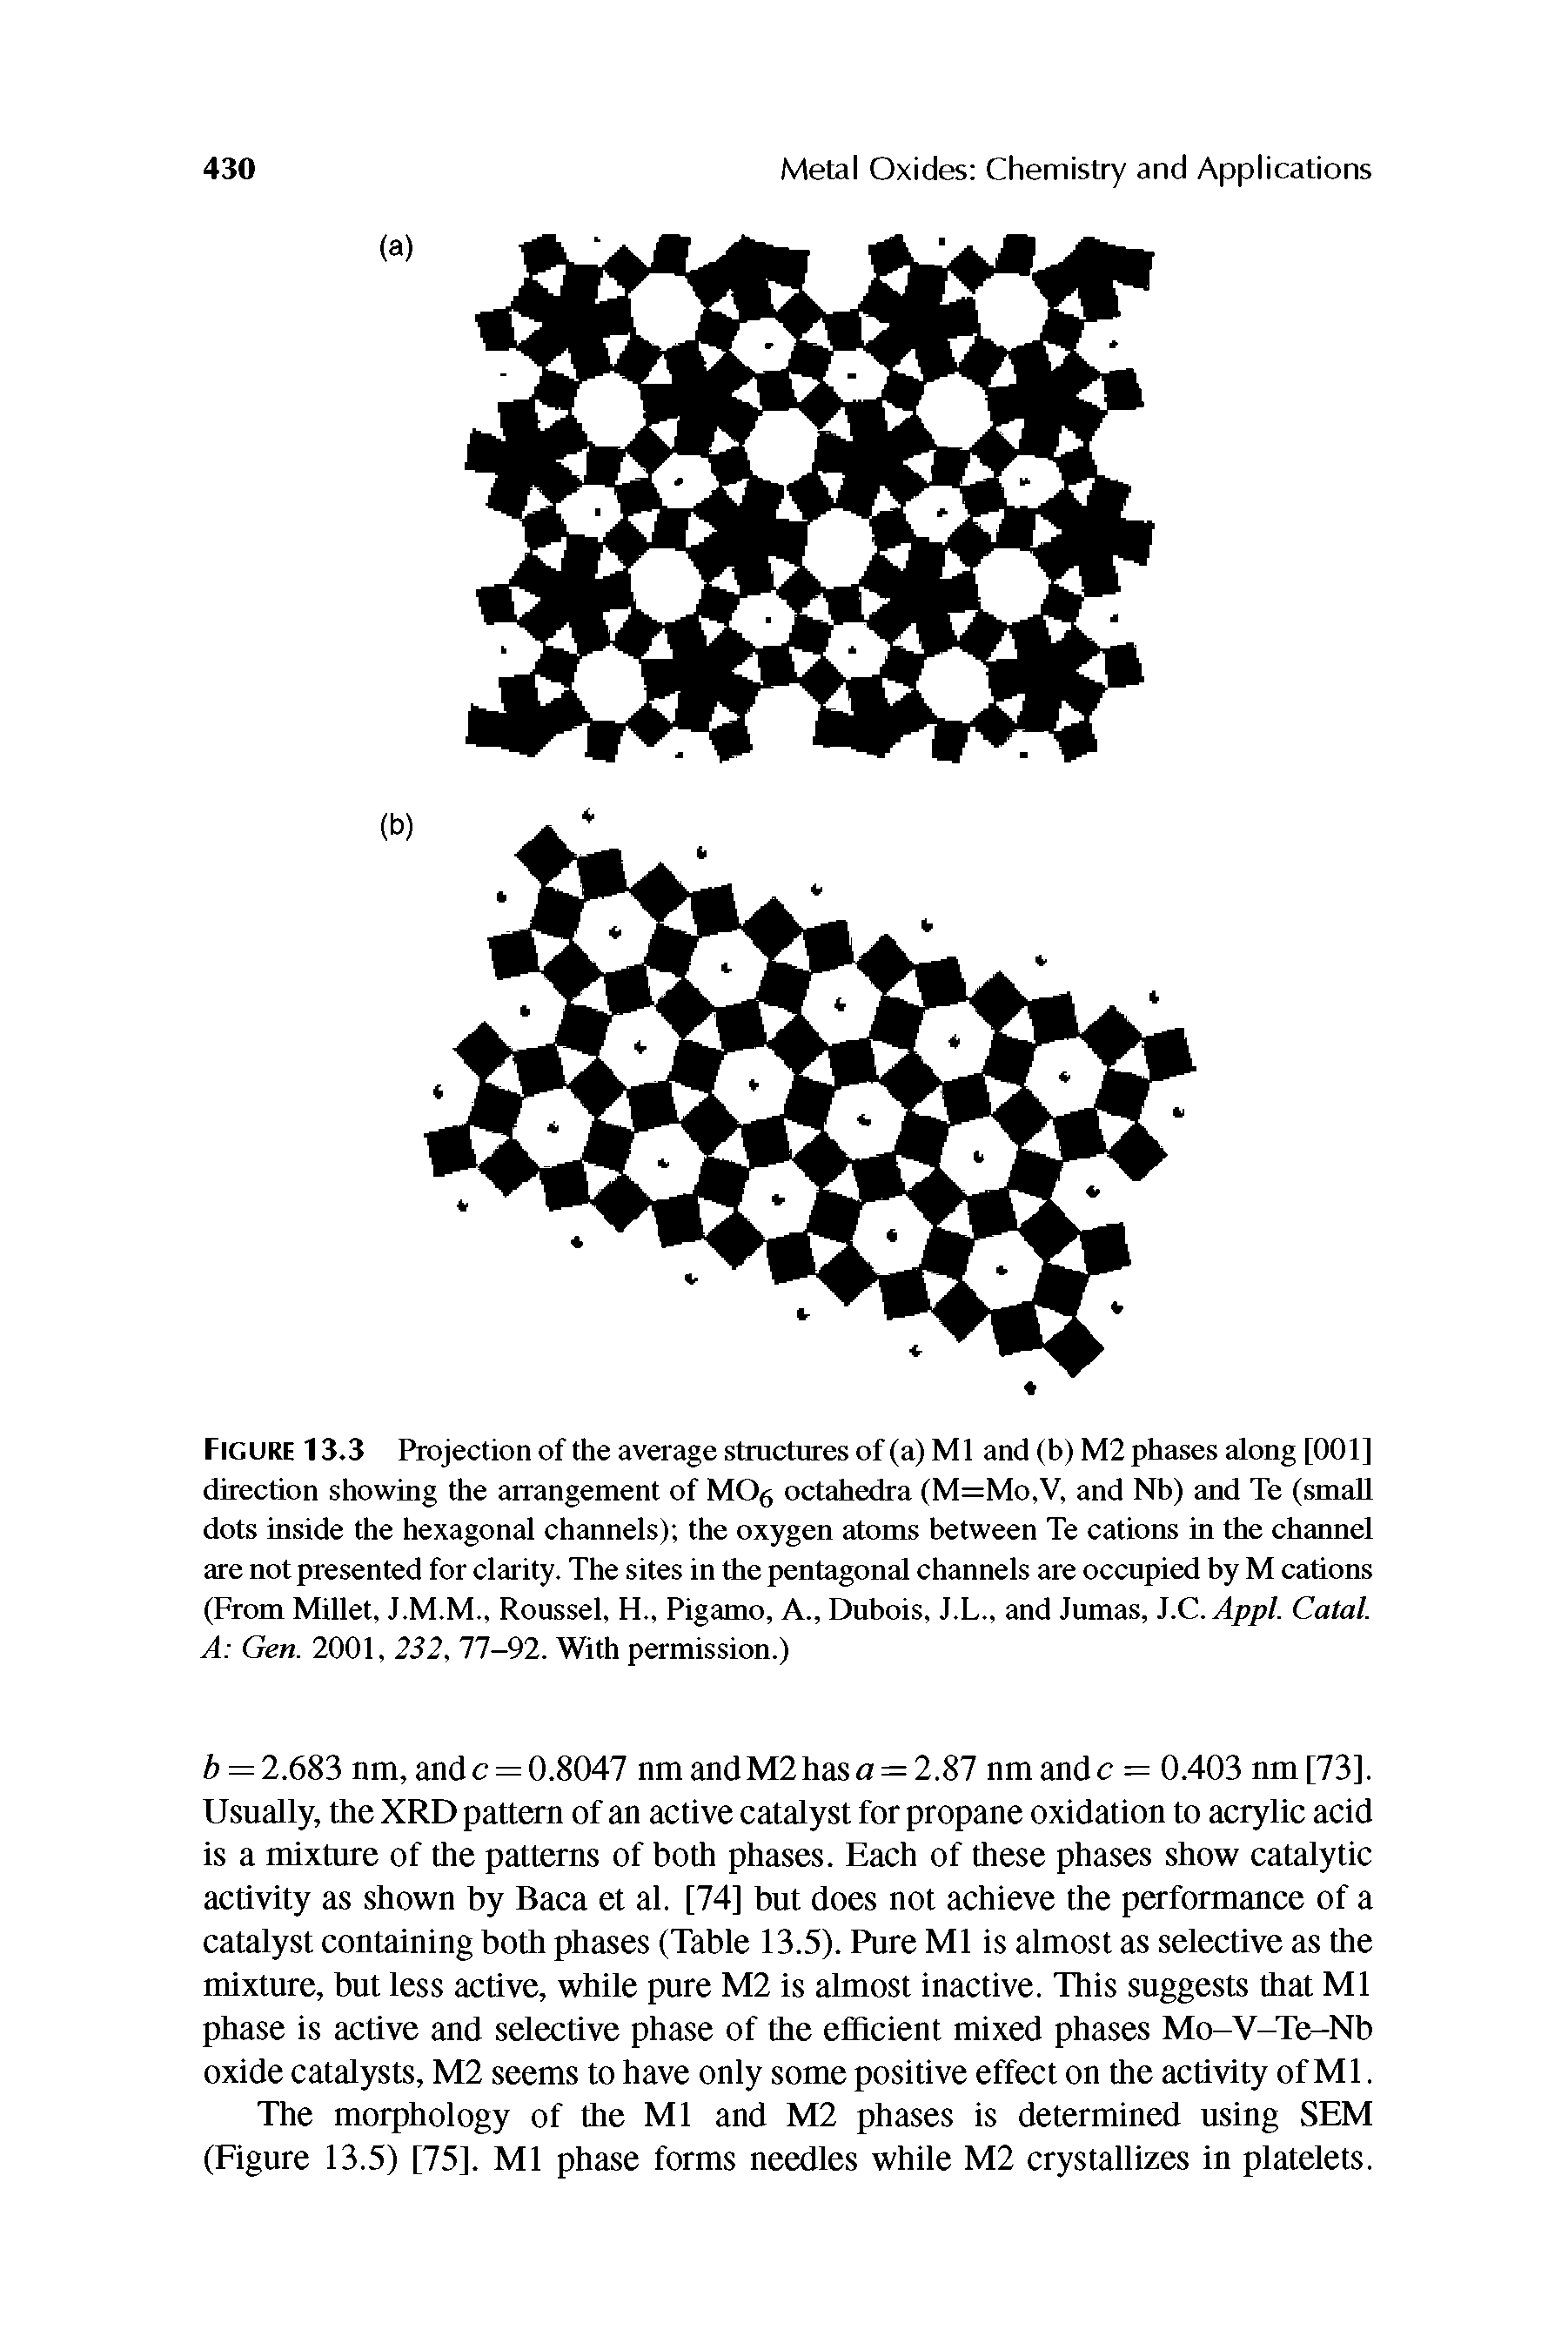 Figure 13.3 Projection of the average structures of (a) Ml and (b) M2 phases along [001] direction showing the arrangement of M06 octahedra (M=Mo,V, and Nb) and Te (small dots inside the hexagonal channels) the oxygen atoms between Te cations in the channel are not presented for clarity. The sites in the pentagonal channels are occupied by M cations (From Millet, J.M.M., Roussel, H., Pigamo, A., Dubois, J.L., and Jumas, J.C. Appl. Catal. A Gen. 2001, 232, 77-92. With permission.)...